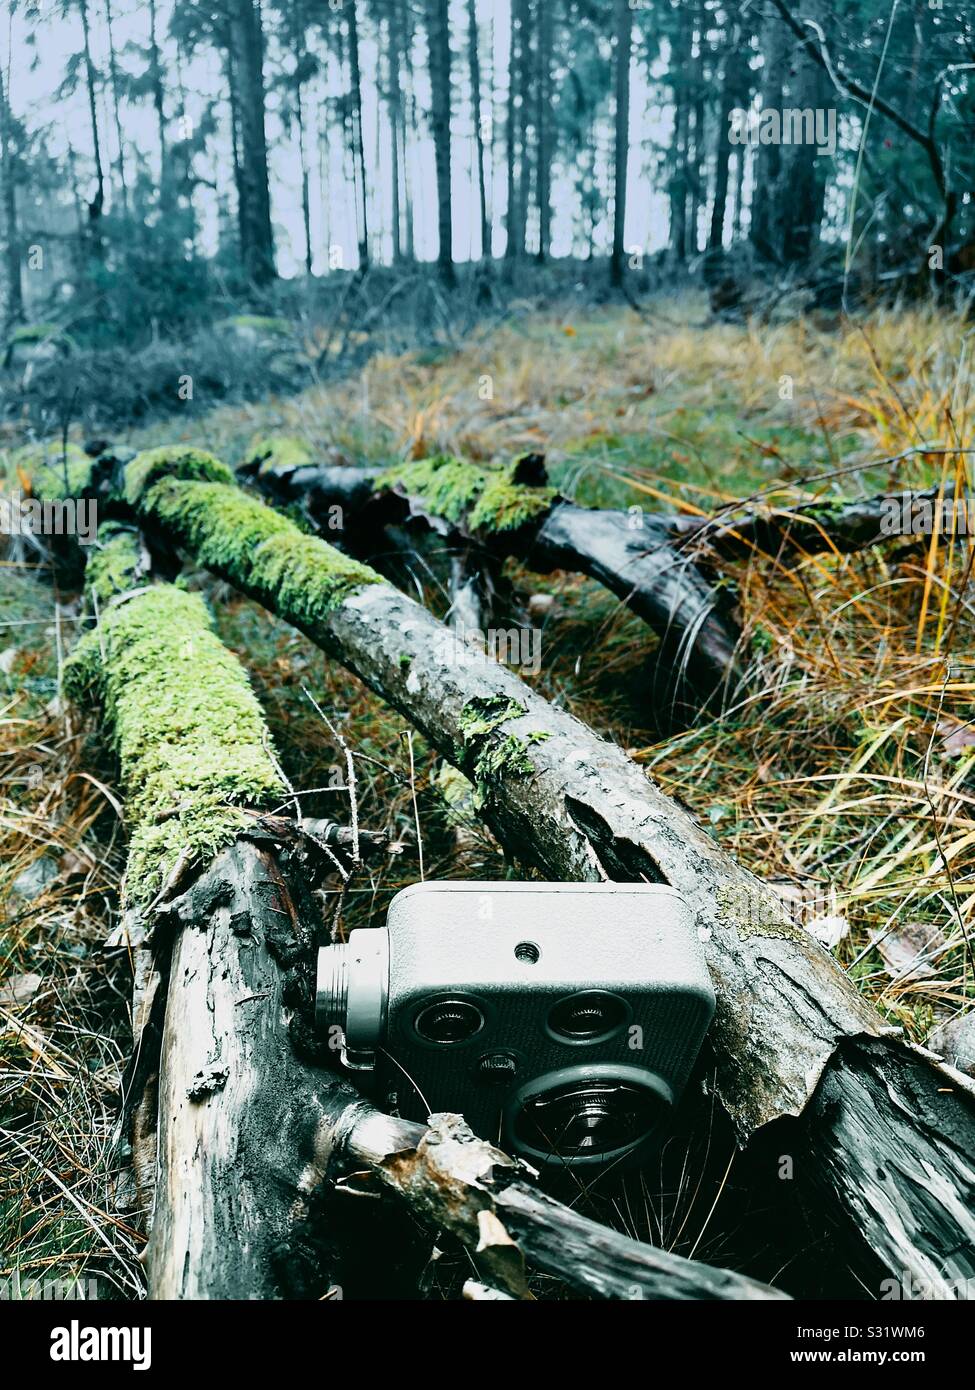 Retro movie camera in forest landscape between two fallen tree trunks, depicting concept of surveillance, Sweden Stock Photo